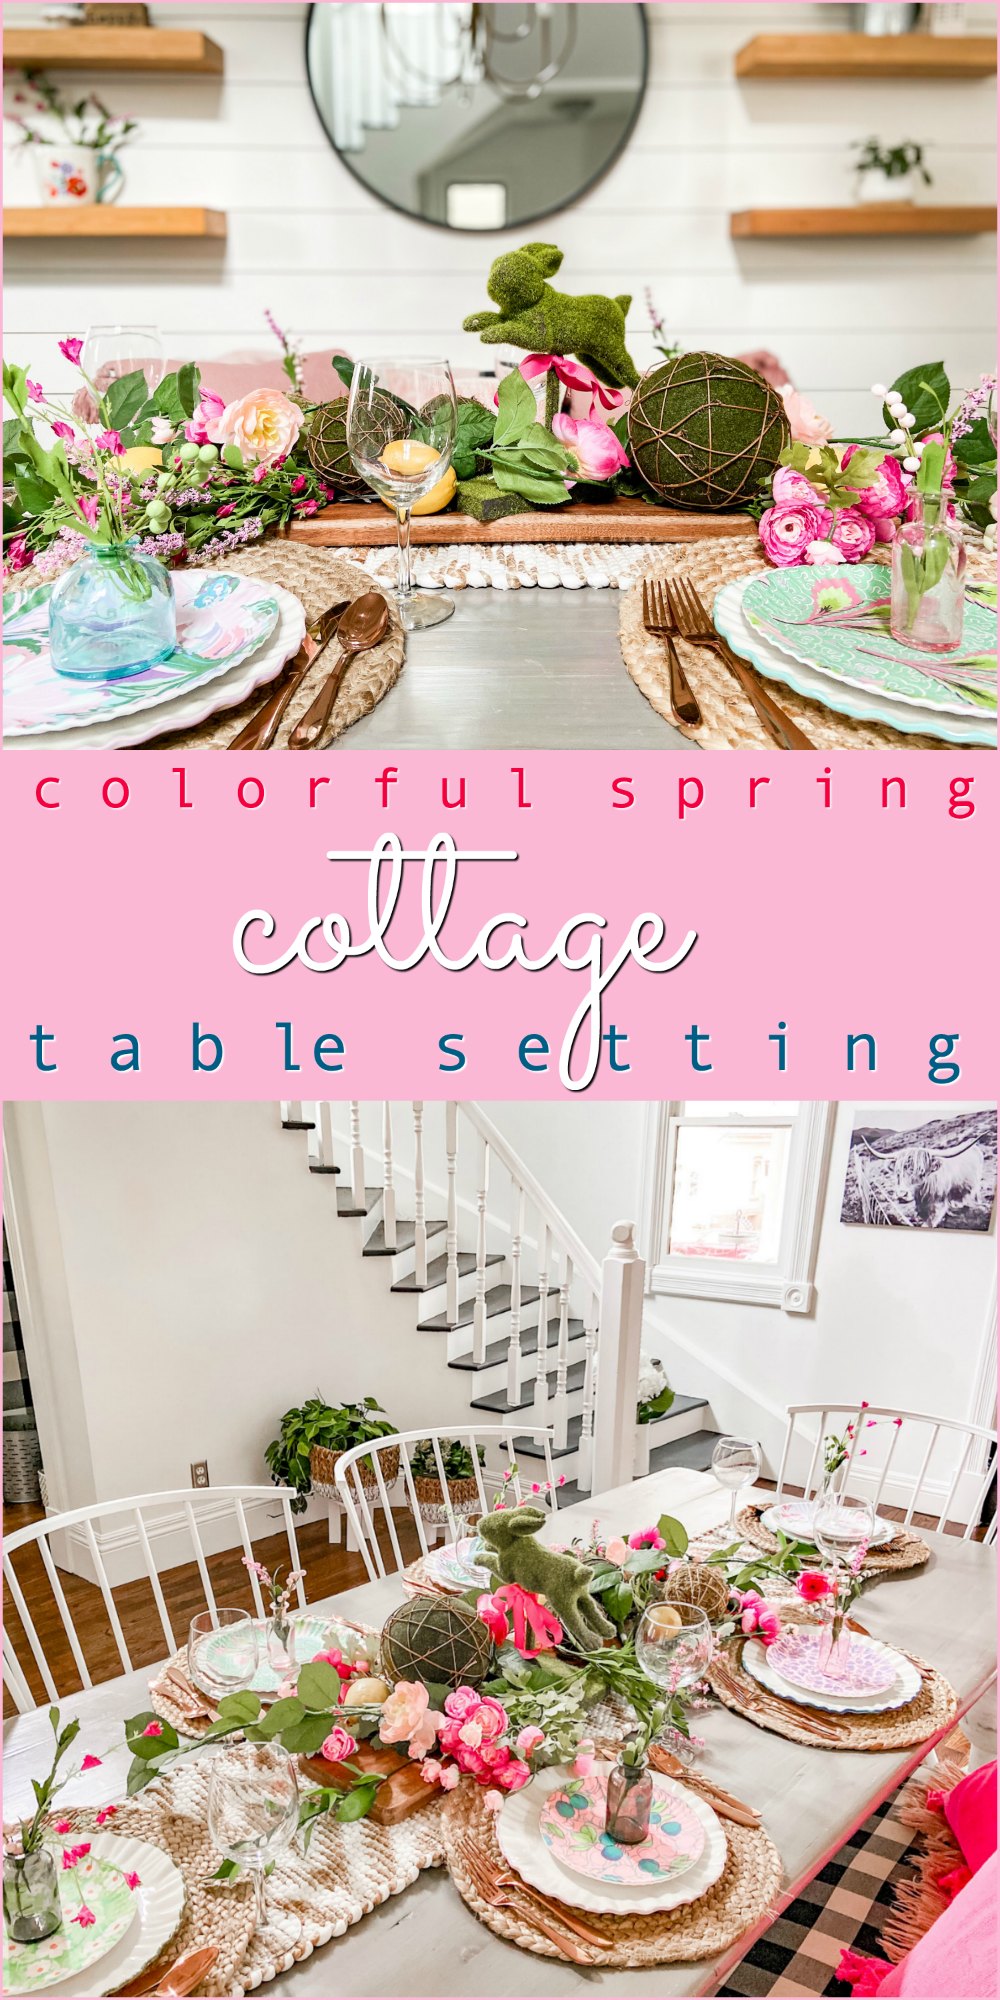 Colorful Spring Cottage Table Setting. Celebrate Spring with a colorful table setting anchored by bright patterned plates and a whimsical bunny and branches centerpiece. 